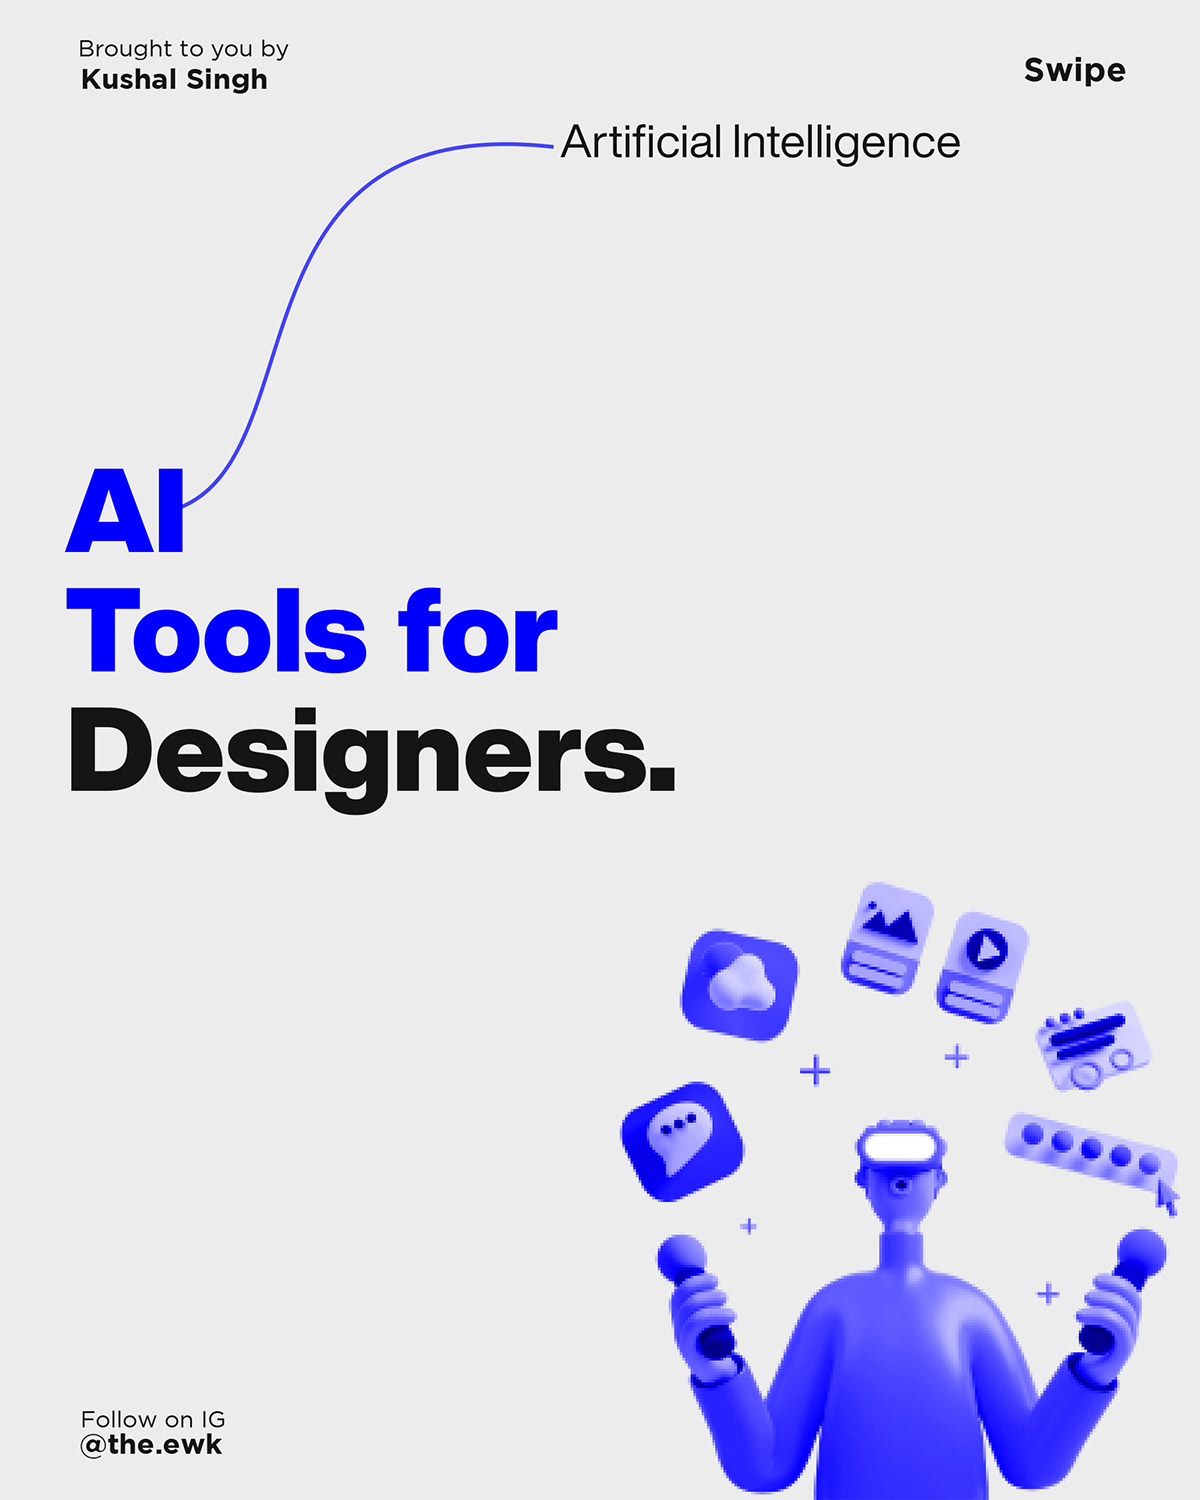 Ai Tools AI Tools for Designers artificial intelligence Tools for Designers